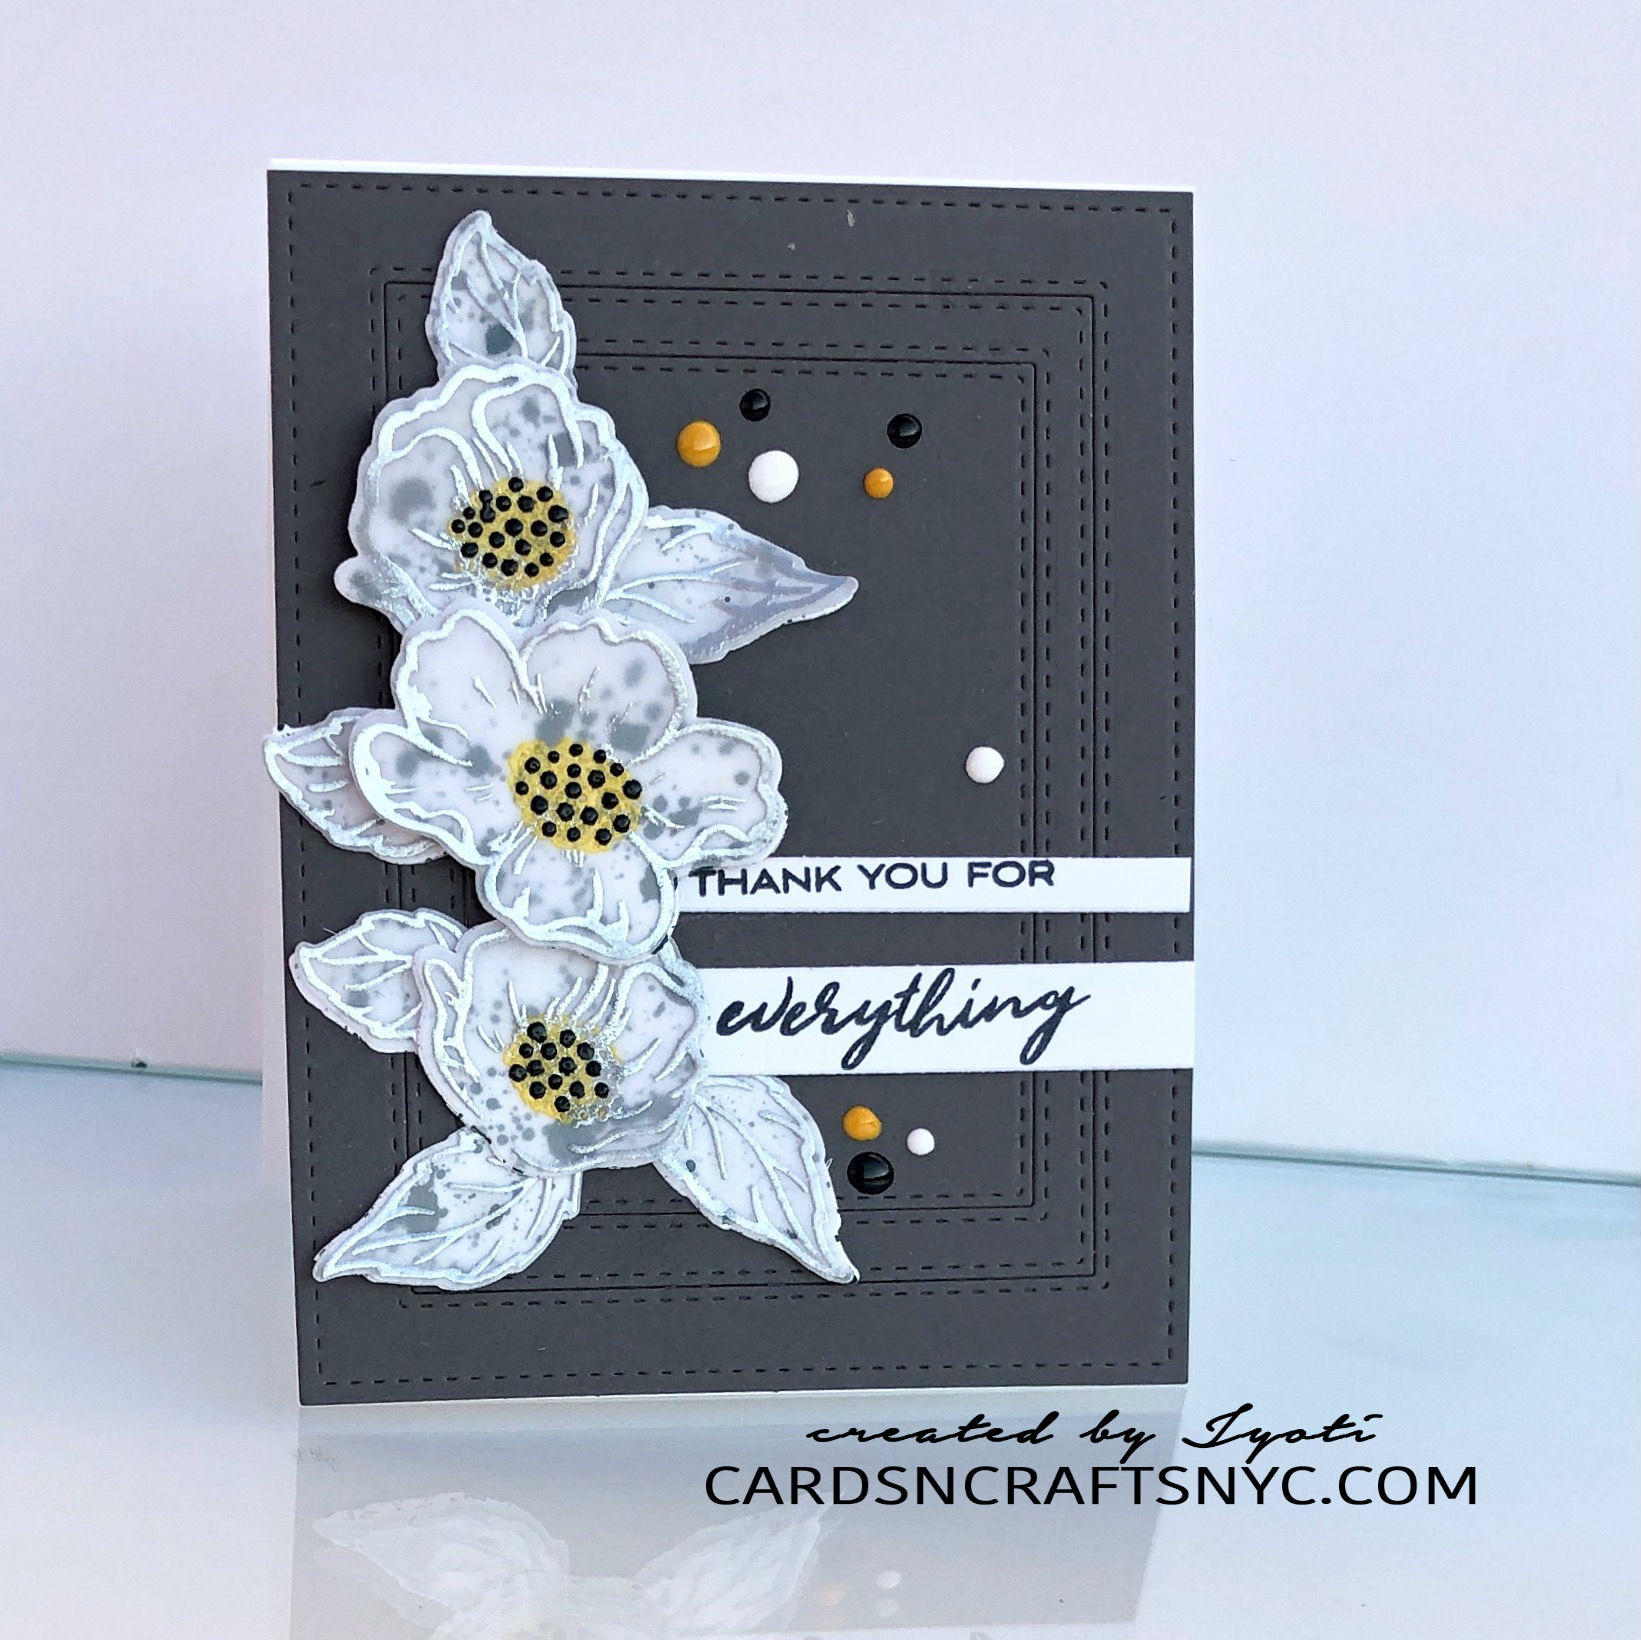 Thank You Cards using Altenew Always There Stamp - CARDSNCRAFTSNYC